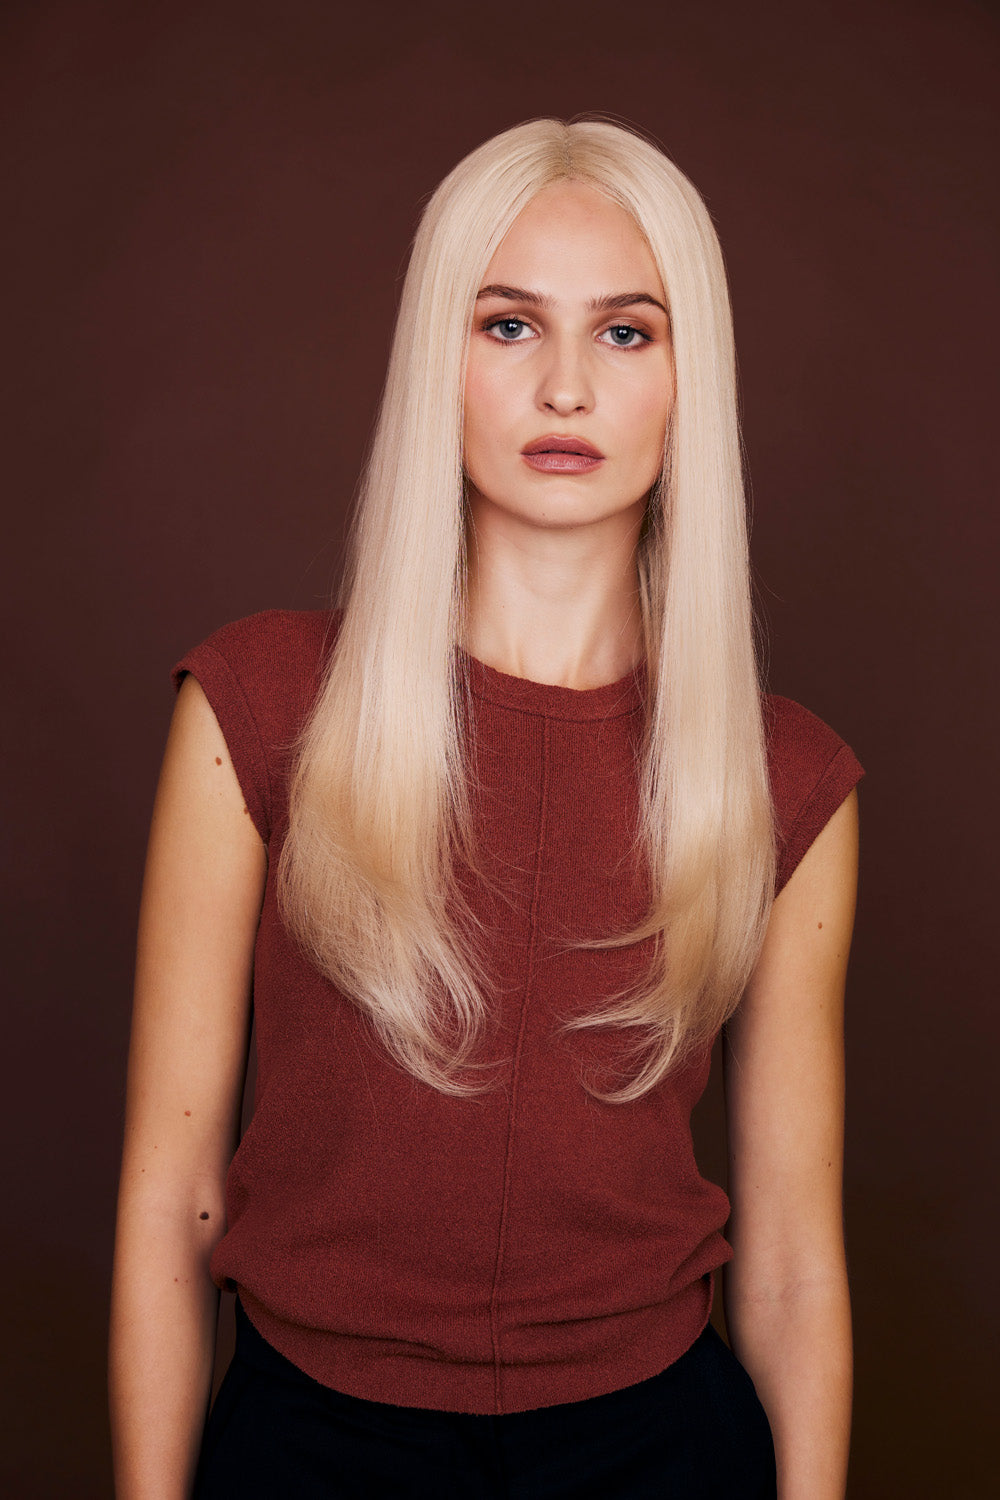 Model wears BHBD pure wig: 45 cm in Platinum blonde perfection! Our Remy human hair wig is soft, tangle-free & features a natural hairline.